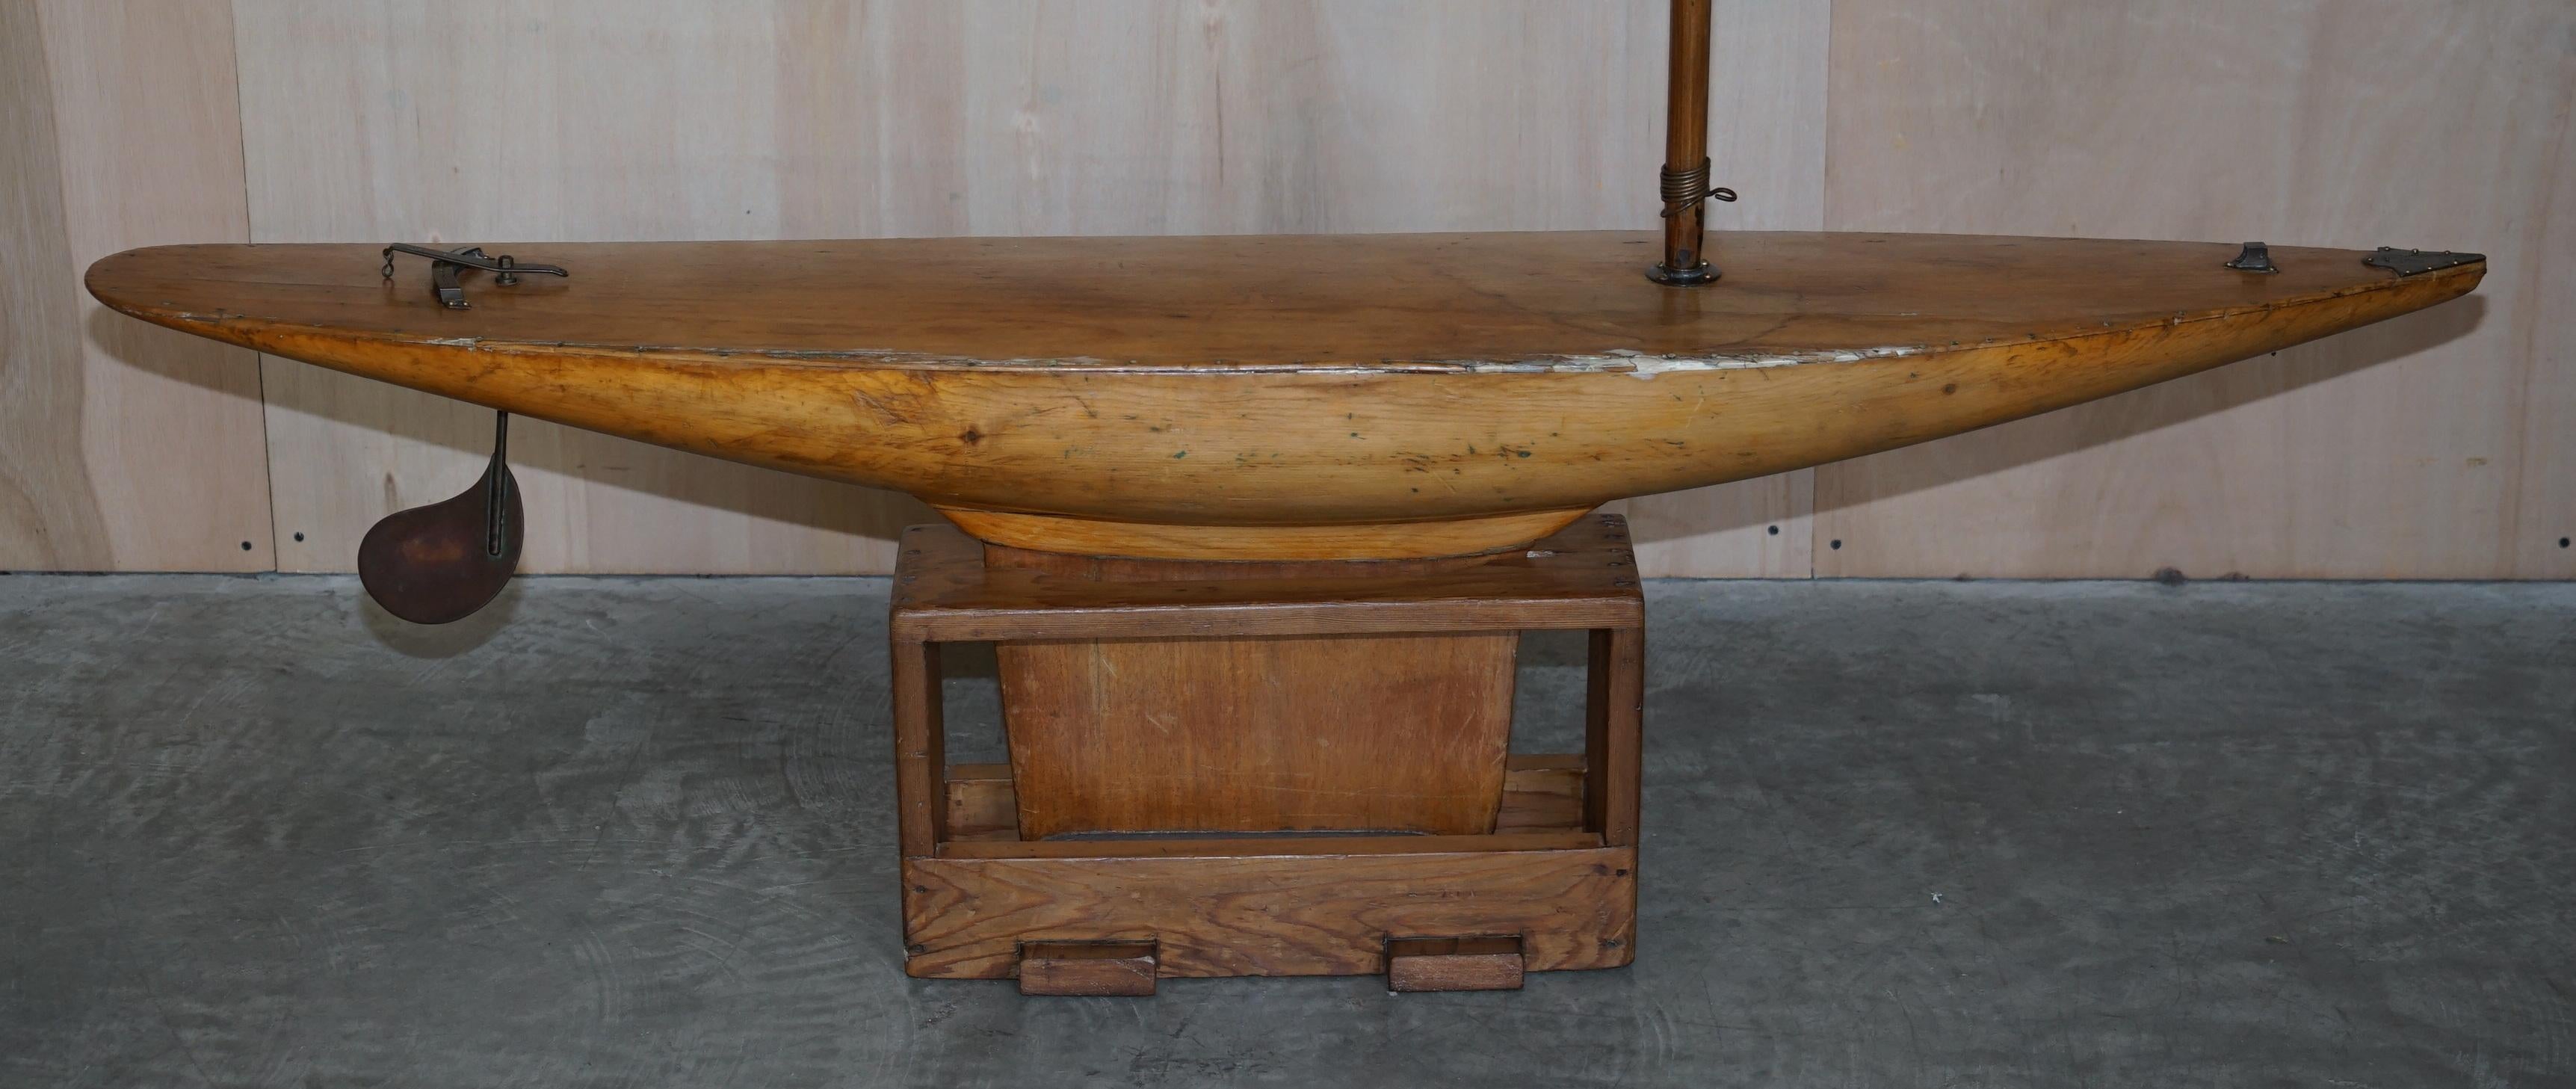 English Large Antique Victorian Hand Made in England Pond Yacht with Original Oak Stand For Sale